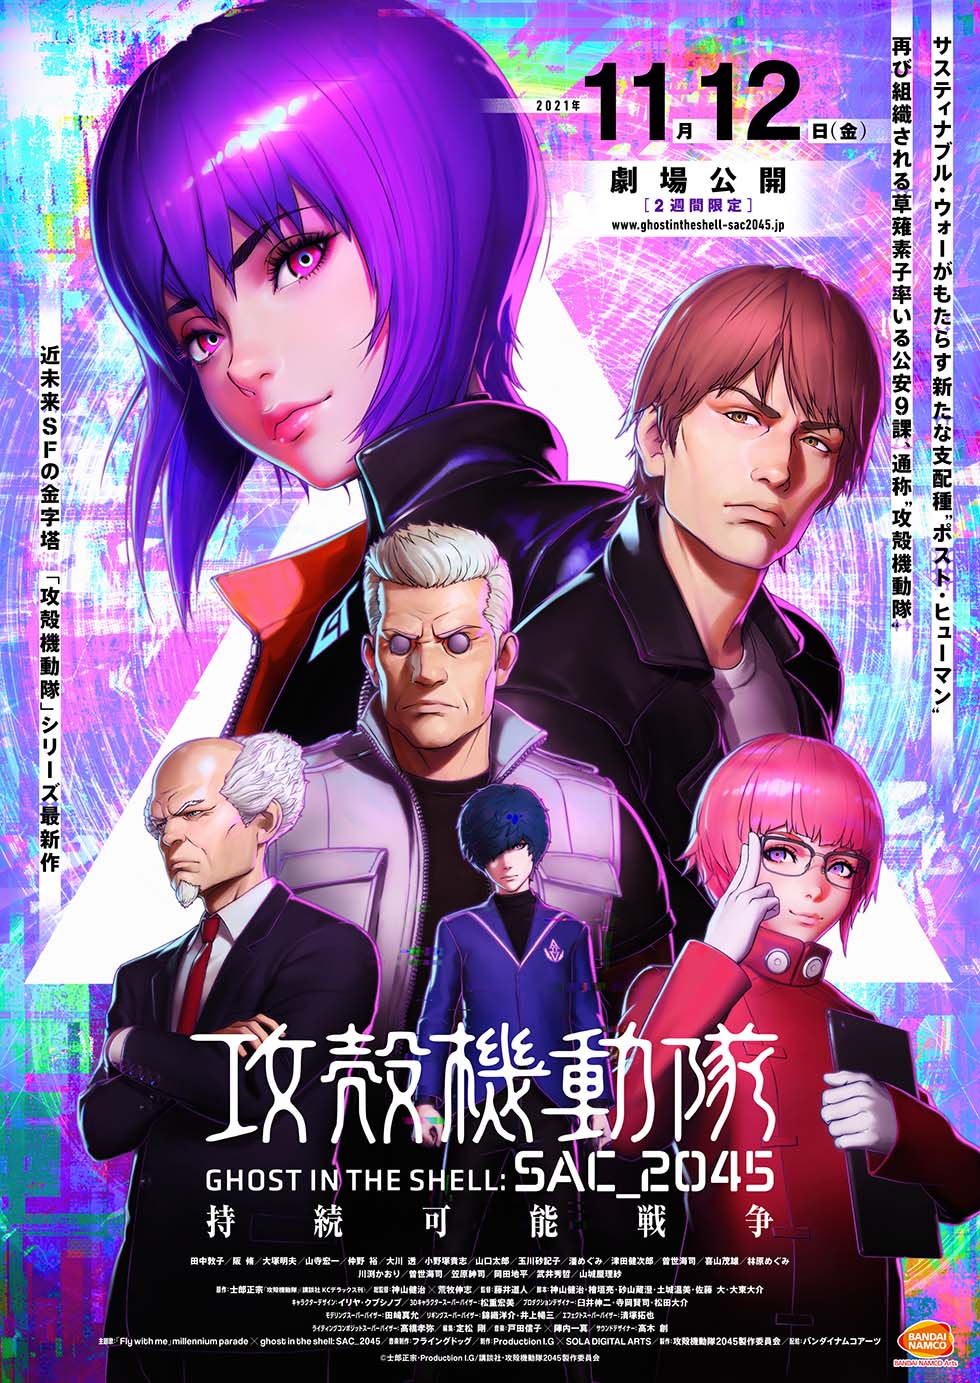 Ghost in the Shell: SAC_2045 will be released just 2 weeks at 12th November